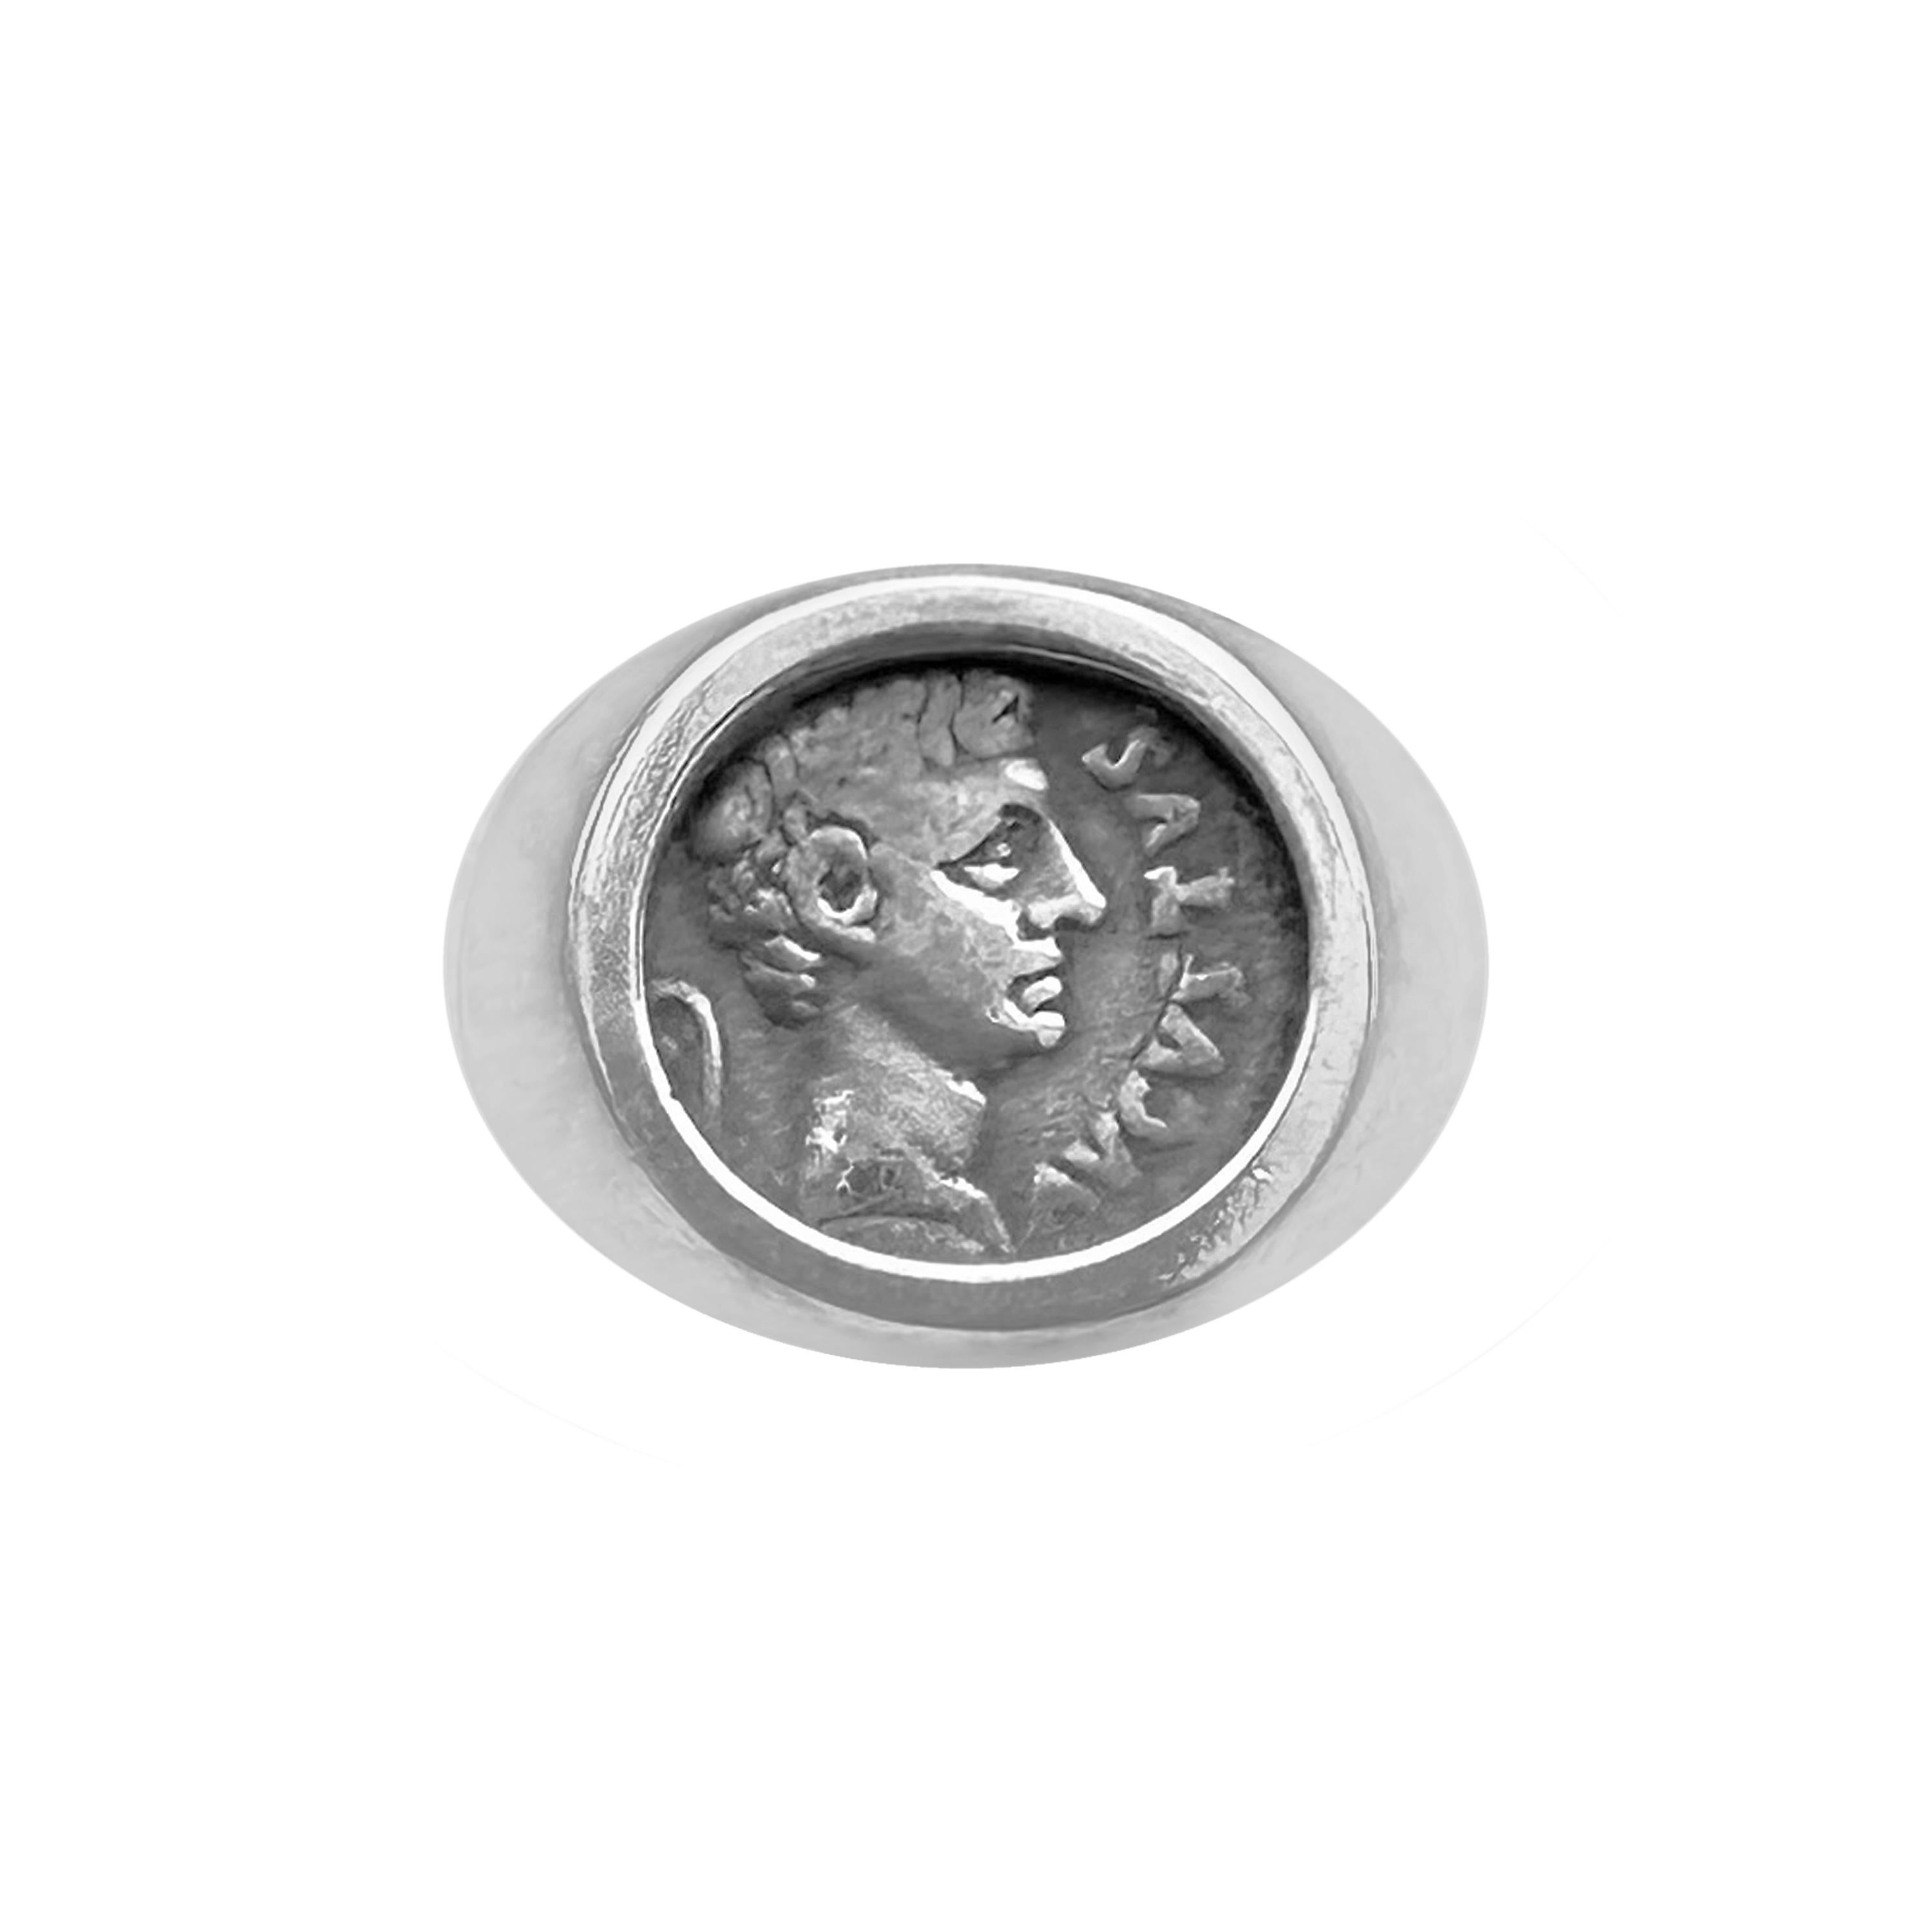 Genuine Ancient Roman coin 27 BC-14 AD Ring depicting Emperor Augustus For Sale